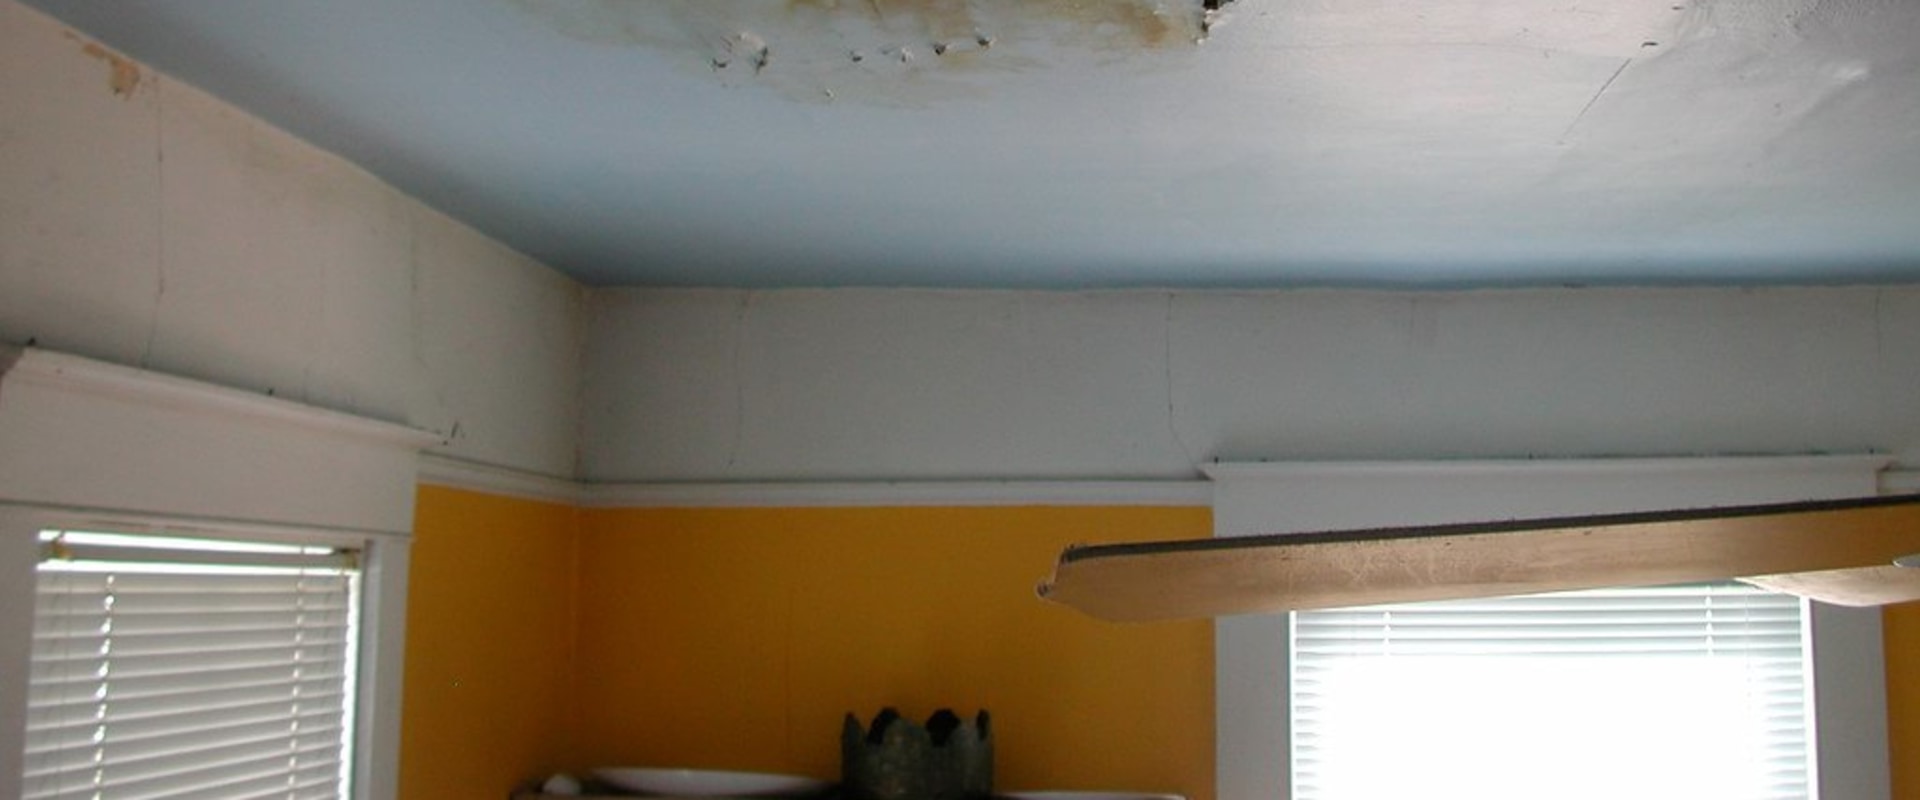 Can water damage get worse?